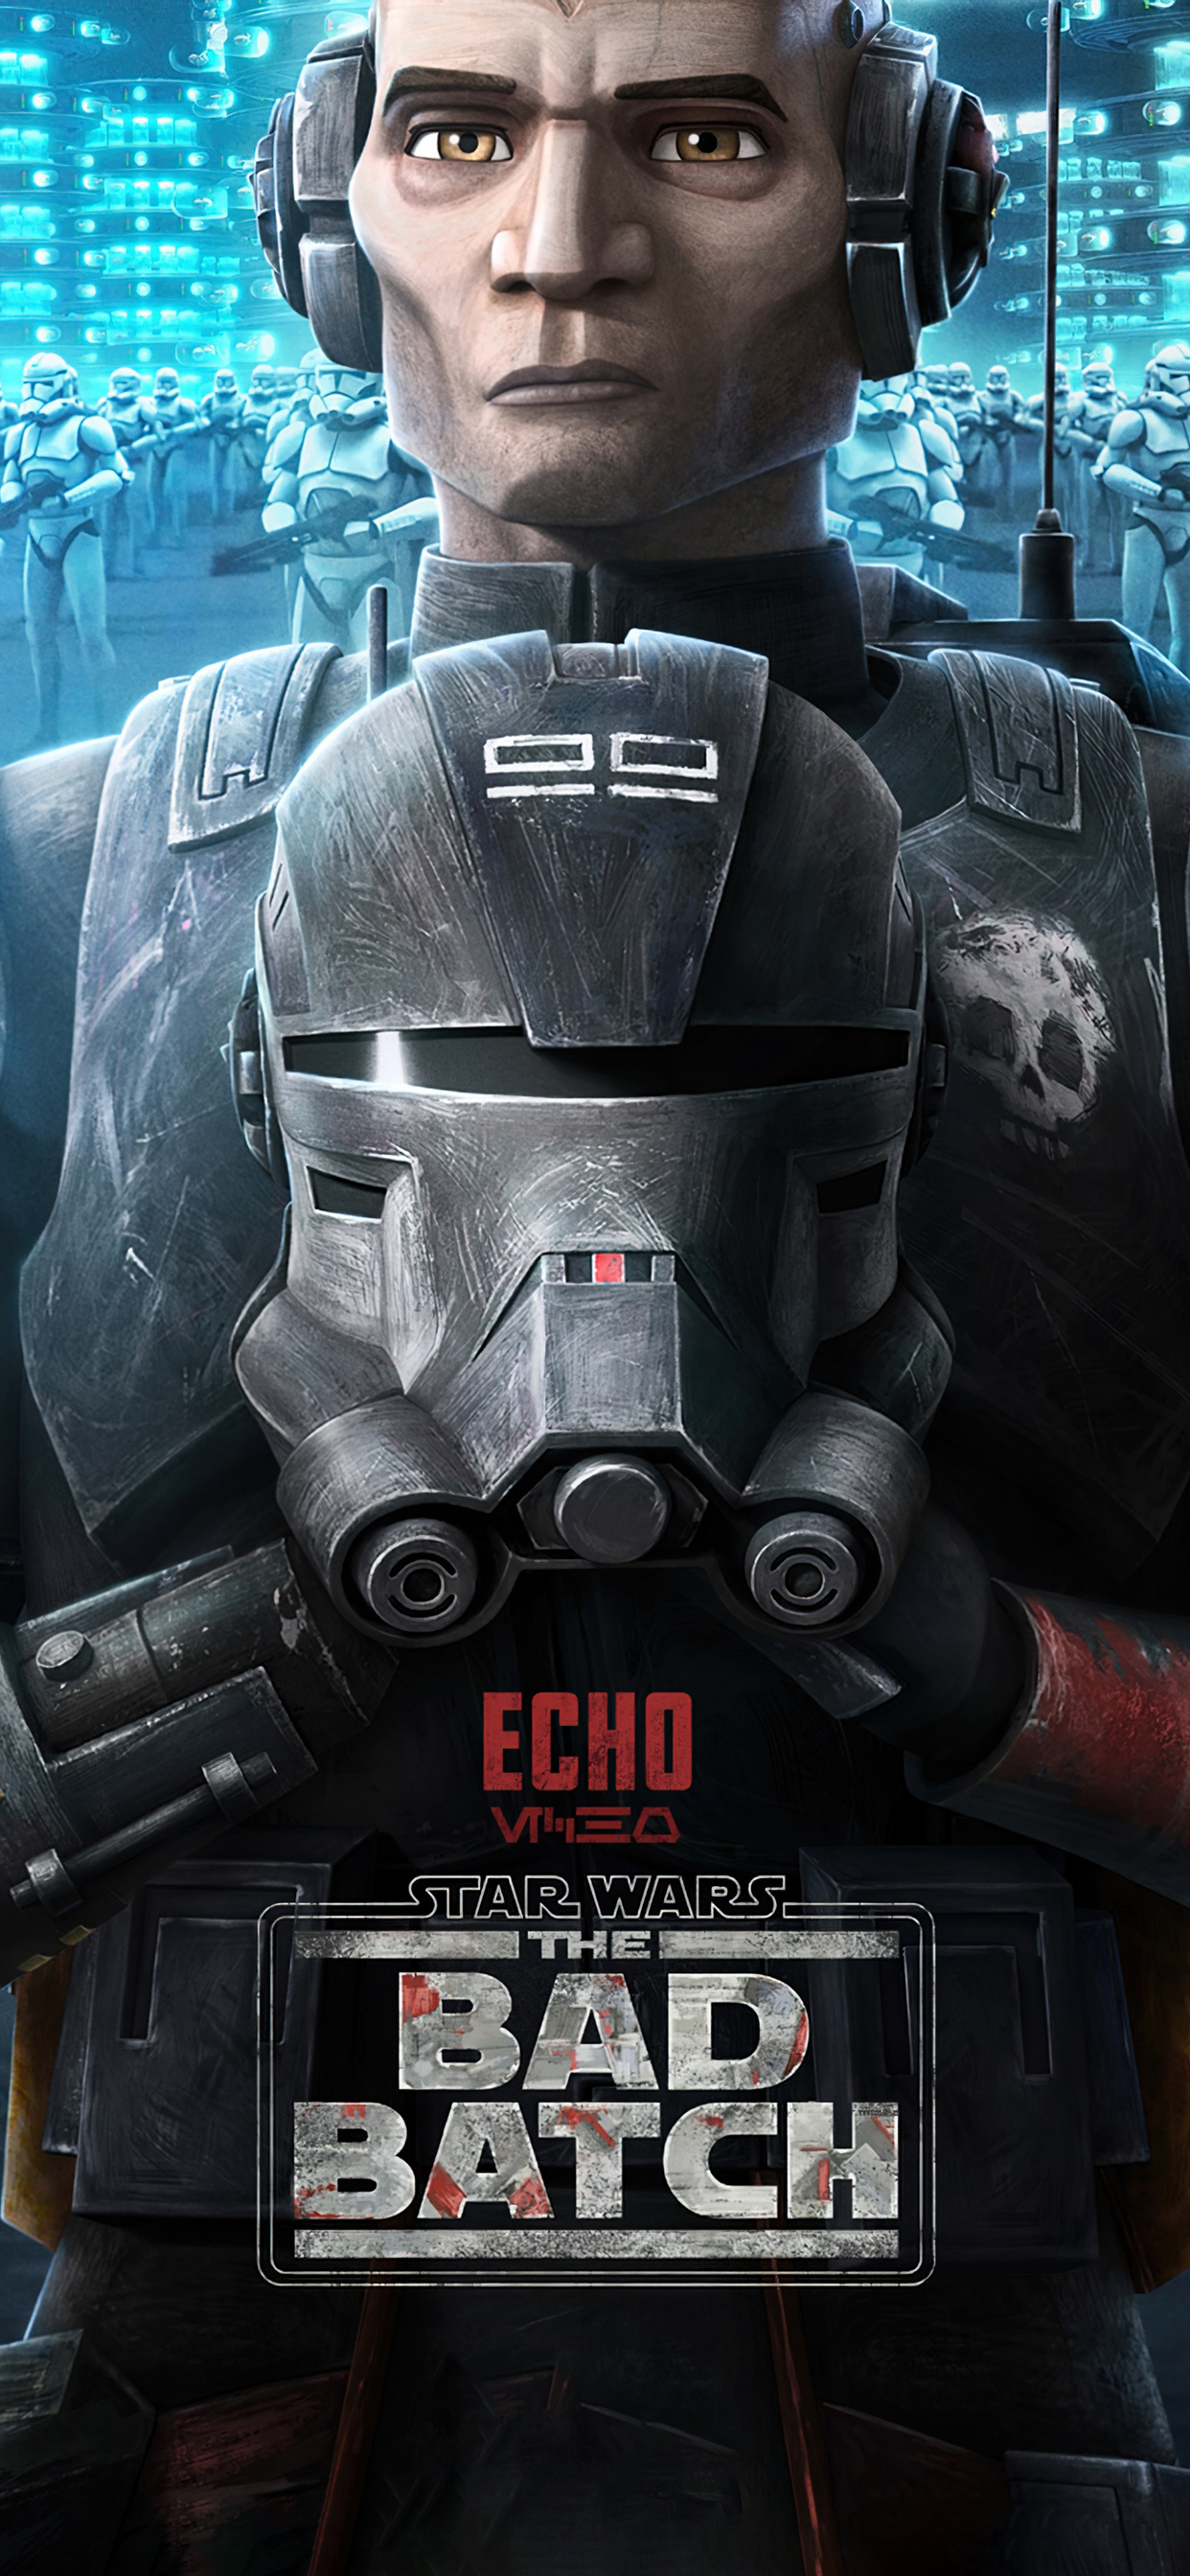 Star Wars: The Bad Batch: Echo, Originally identified as CT-21-0408, a cadet of the Domino Squad. 1250x2690 HD Wallpaper.